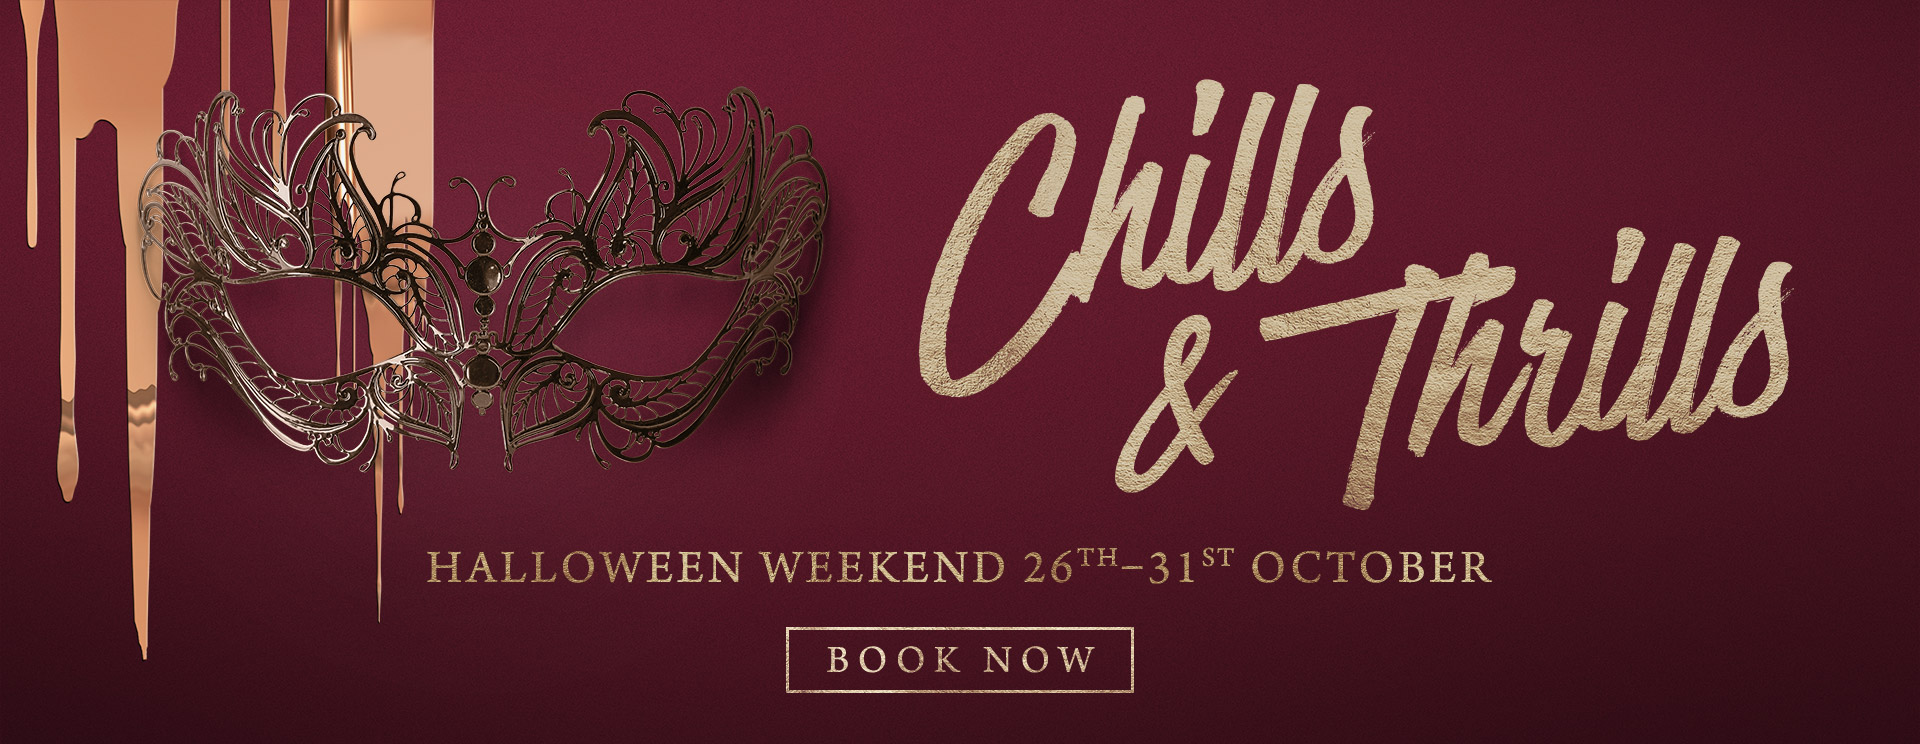 Chills & Thrills this Halloween at The Encore